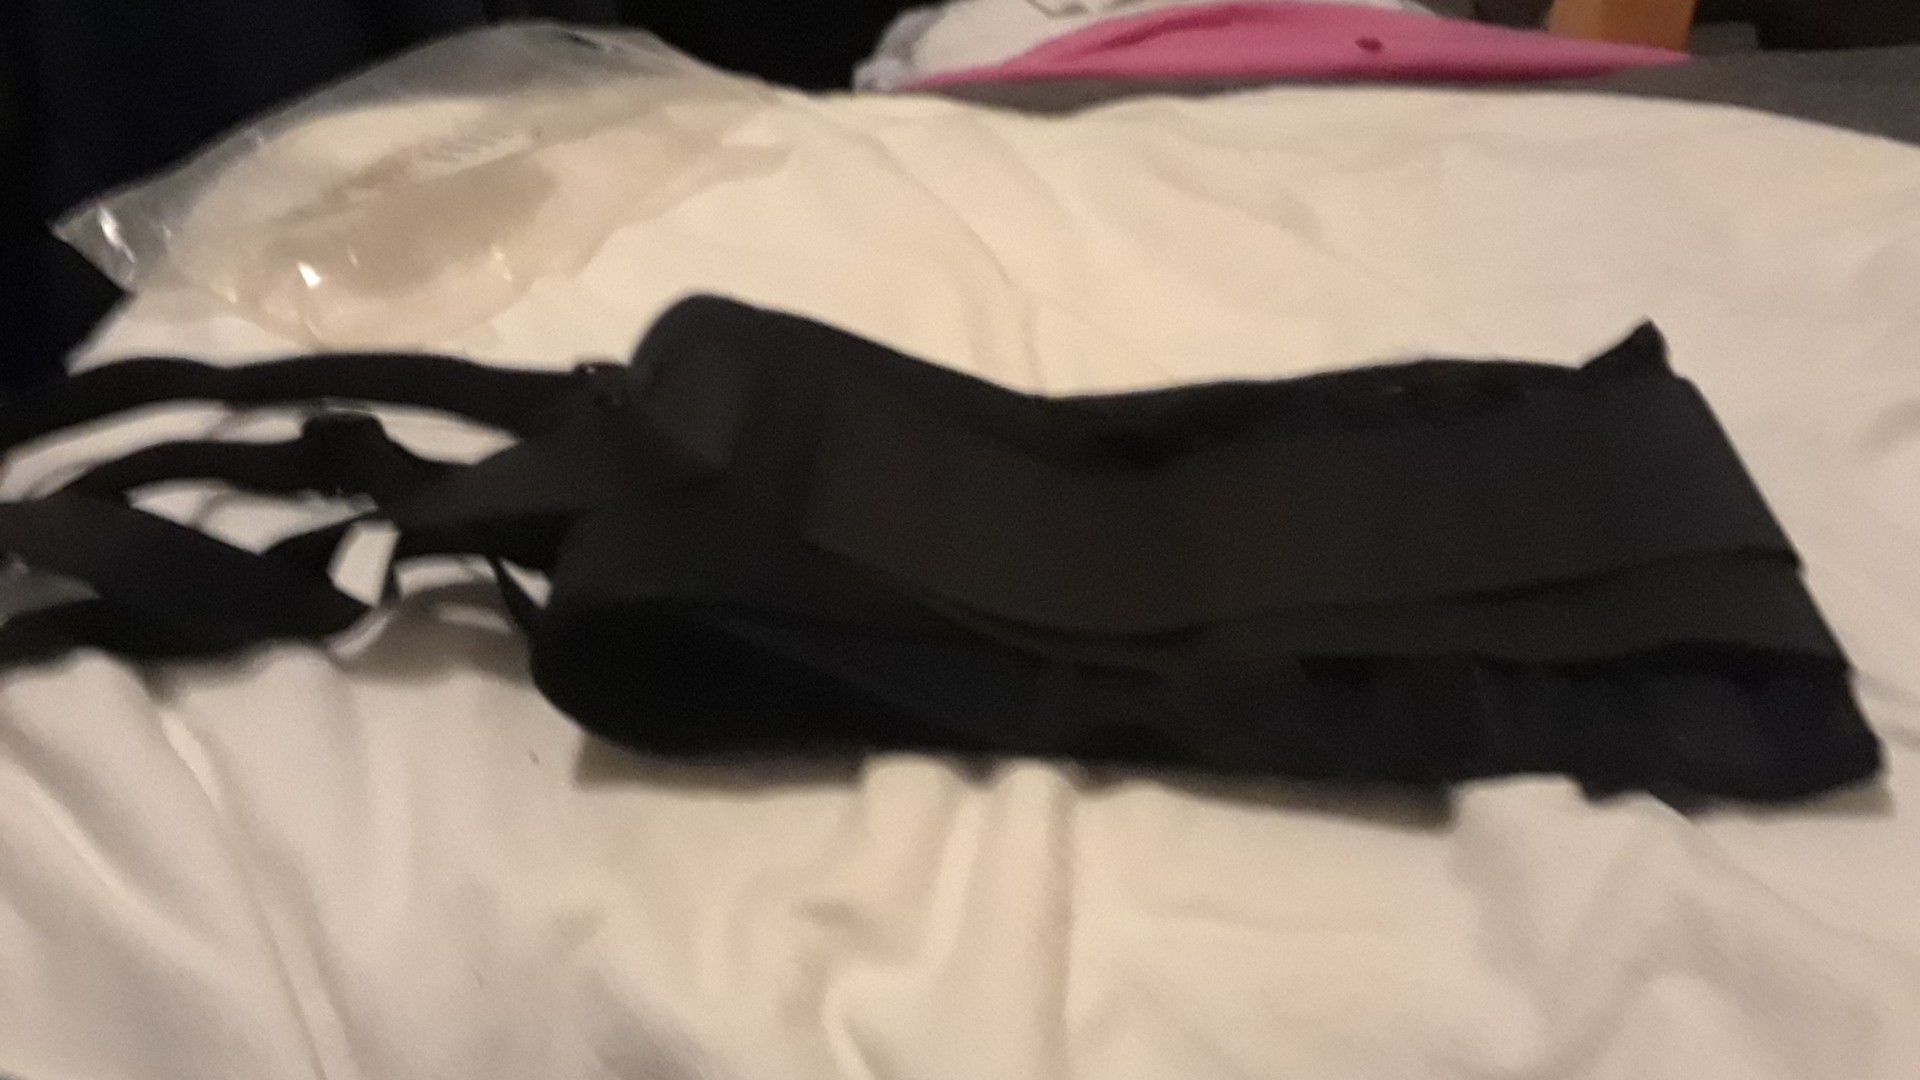 Back brace/support w/ suspenders for heavy lifting